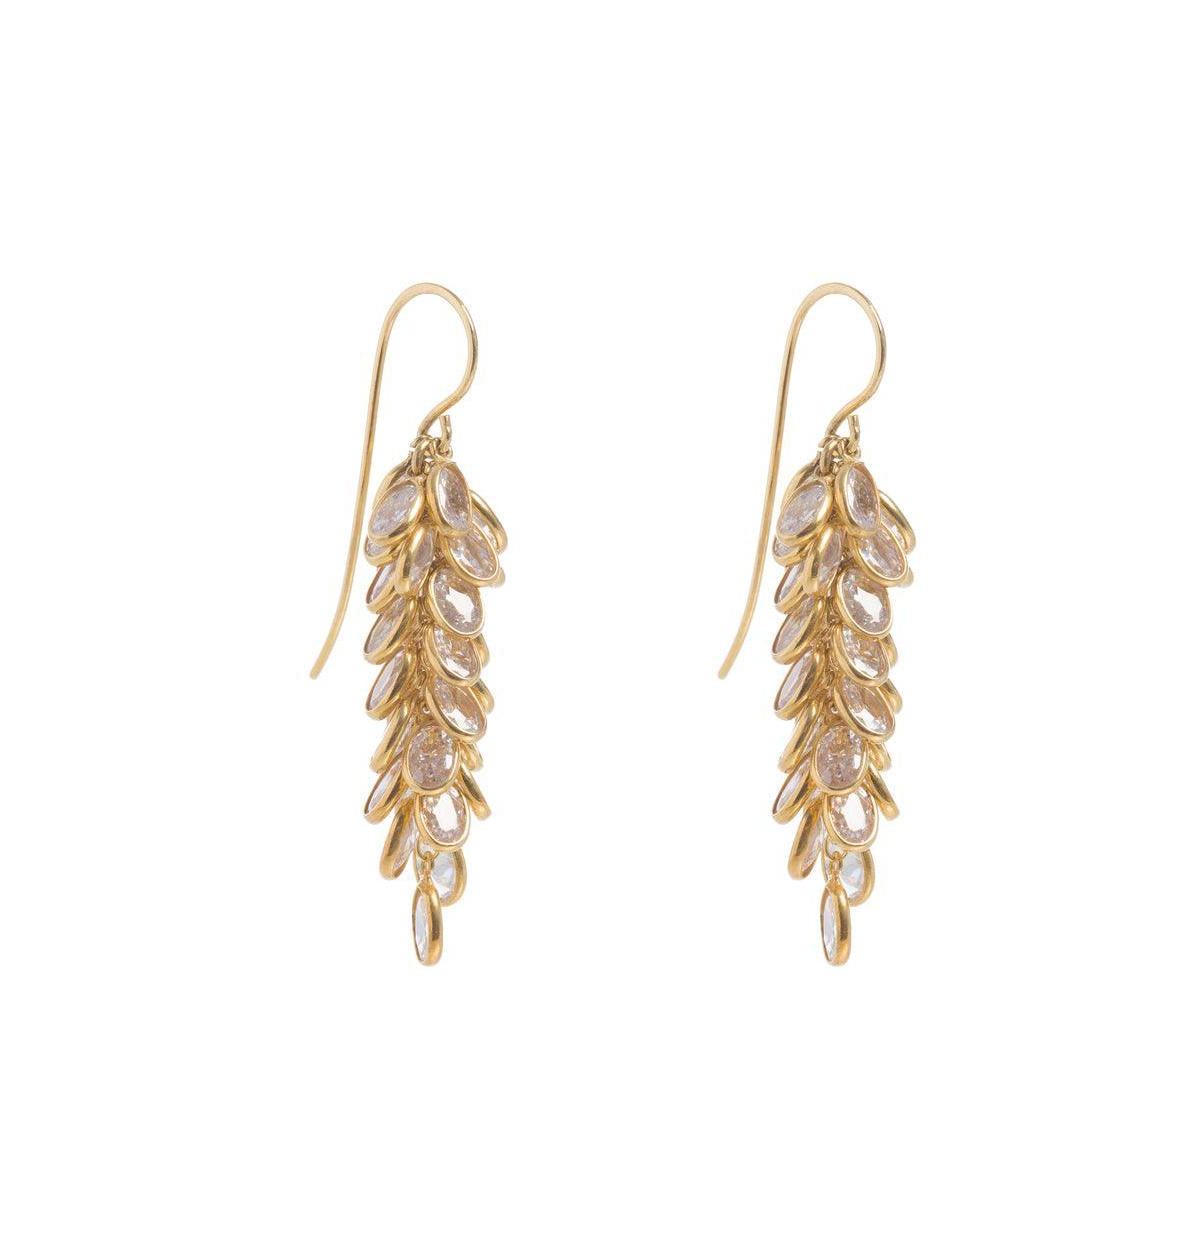 22CT Gold Midi Crystal Drops Earrings - Gold